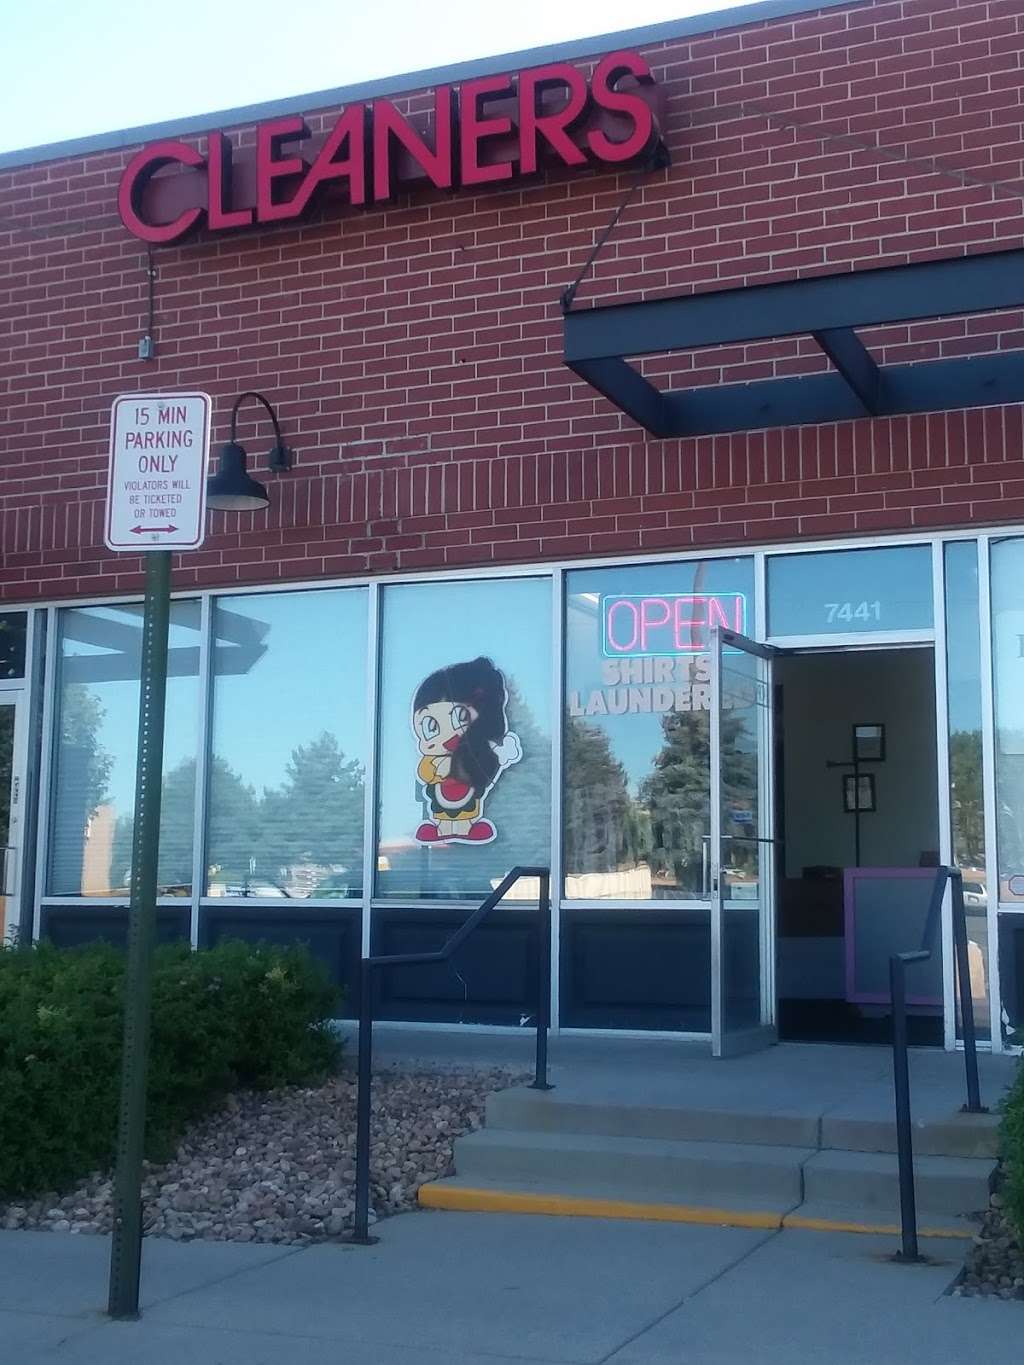 Cp Cleaners | 7441 E Iliff Ave, Denver, CO 80231 | Phone: (303) 369-6161